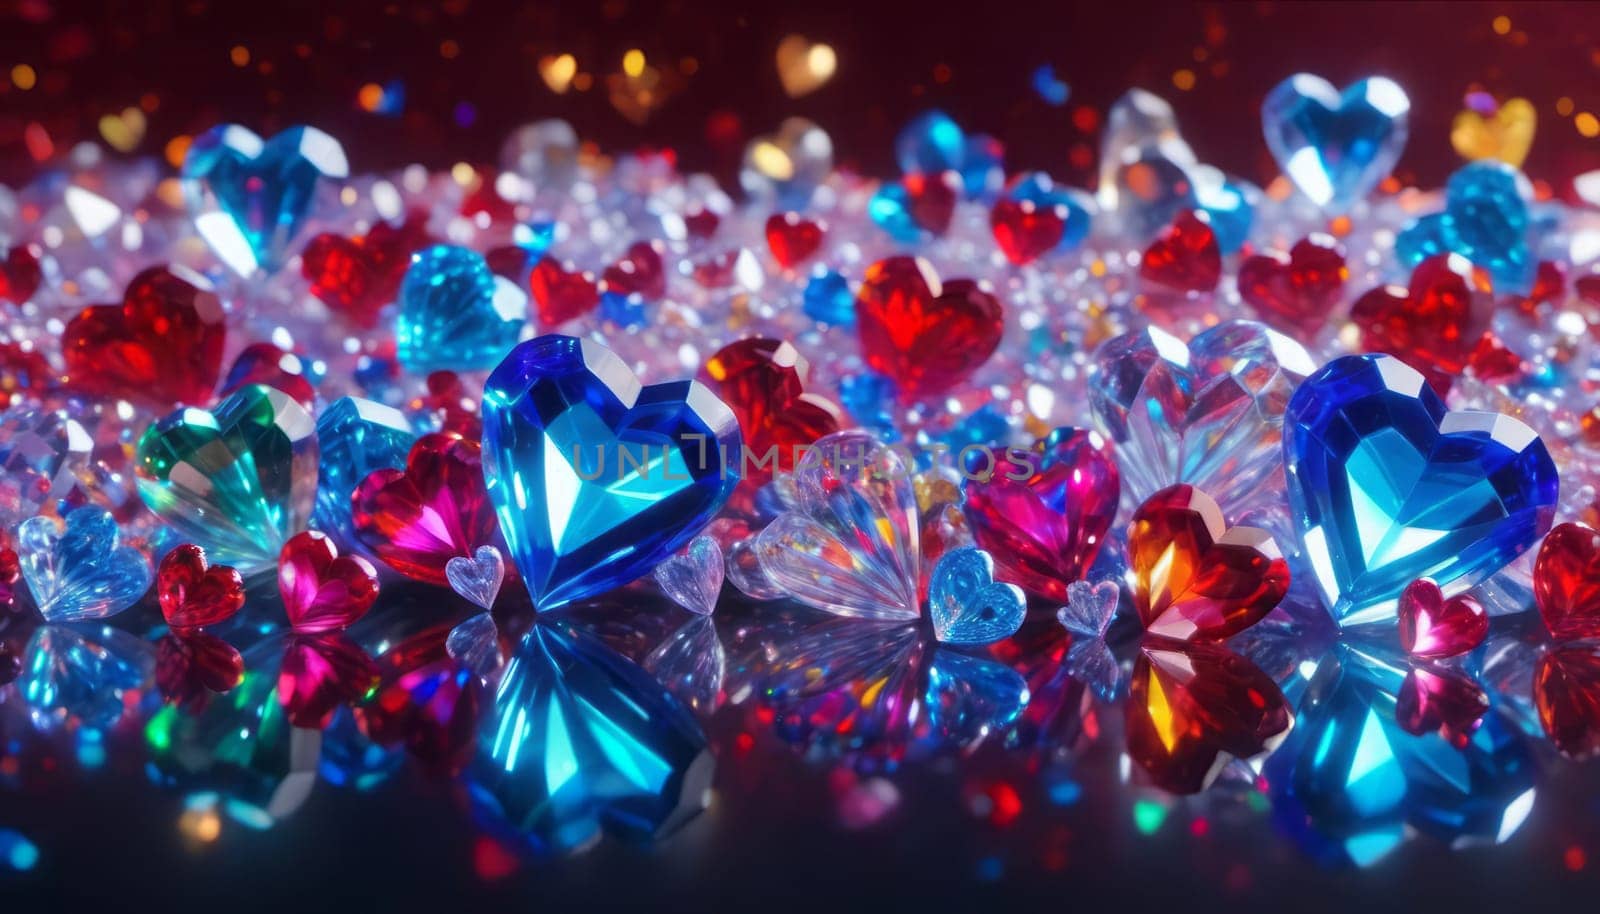 crystal's, translucent, transparent, close-up with deep depth of field Valentine's realistic detailed background, different little ones sizes hearts, transparent colors of the rainbow hearts, against a transparent scattering crystals, falling crystals, highlights, glints, reflections off glass